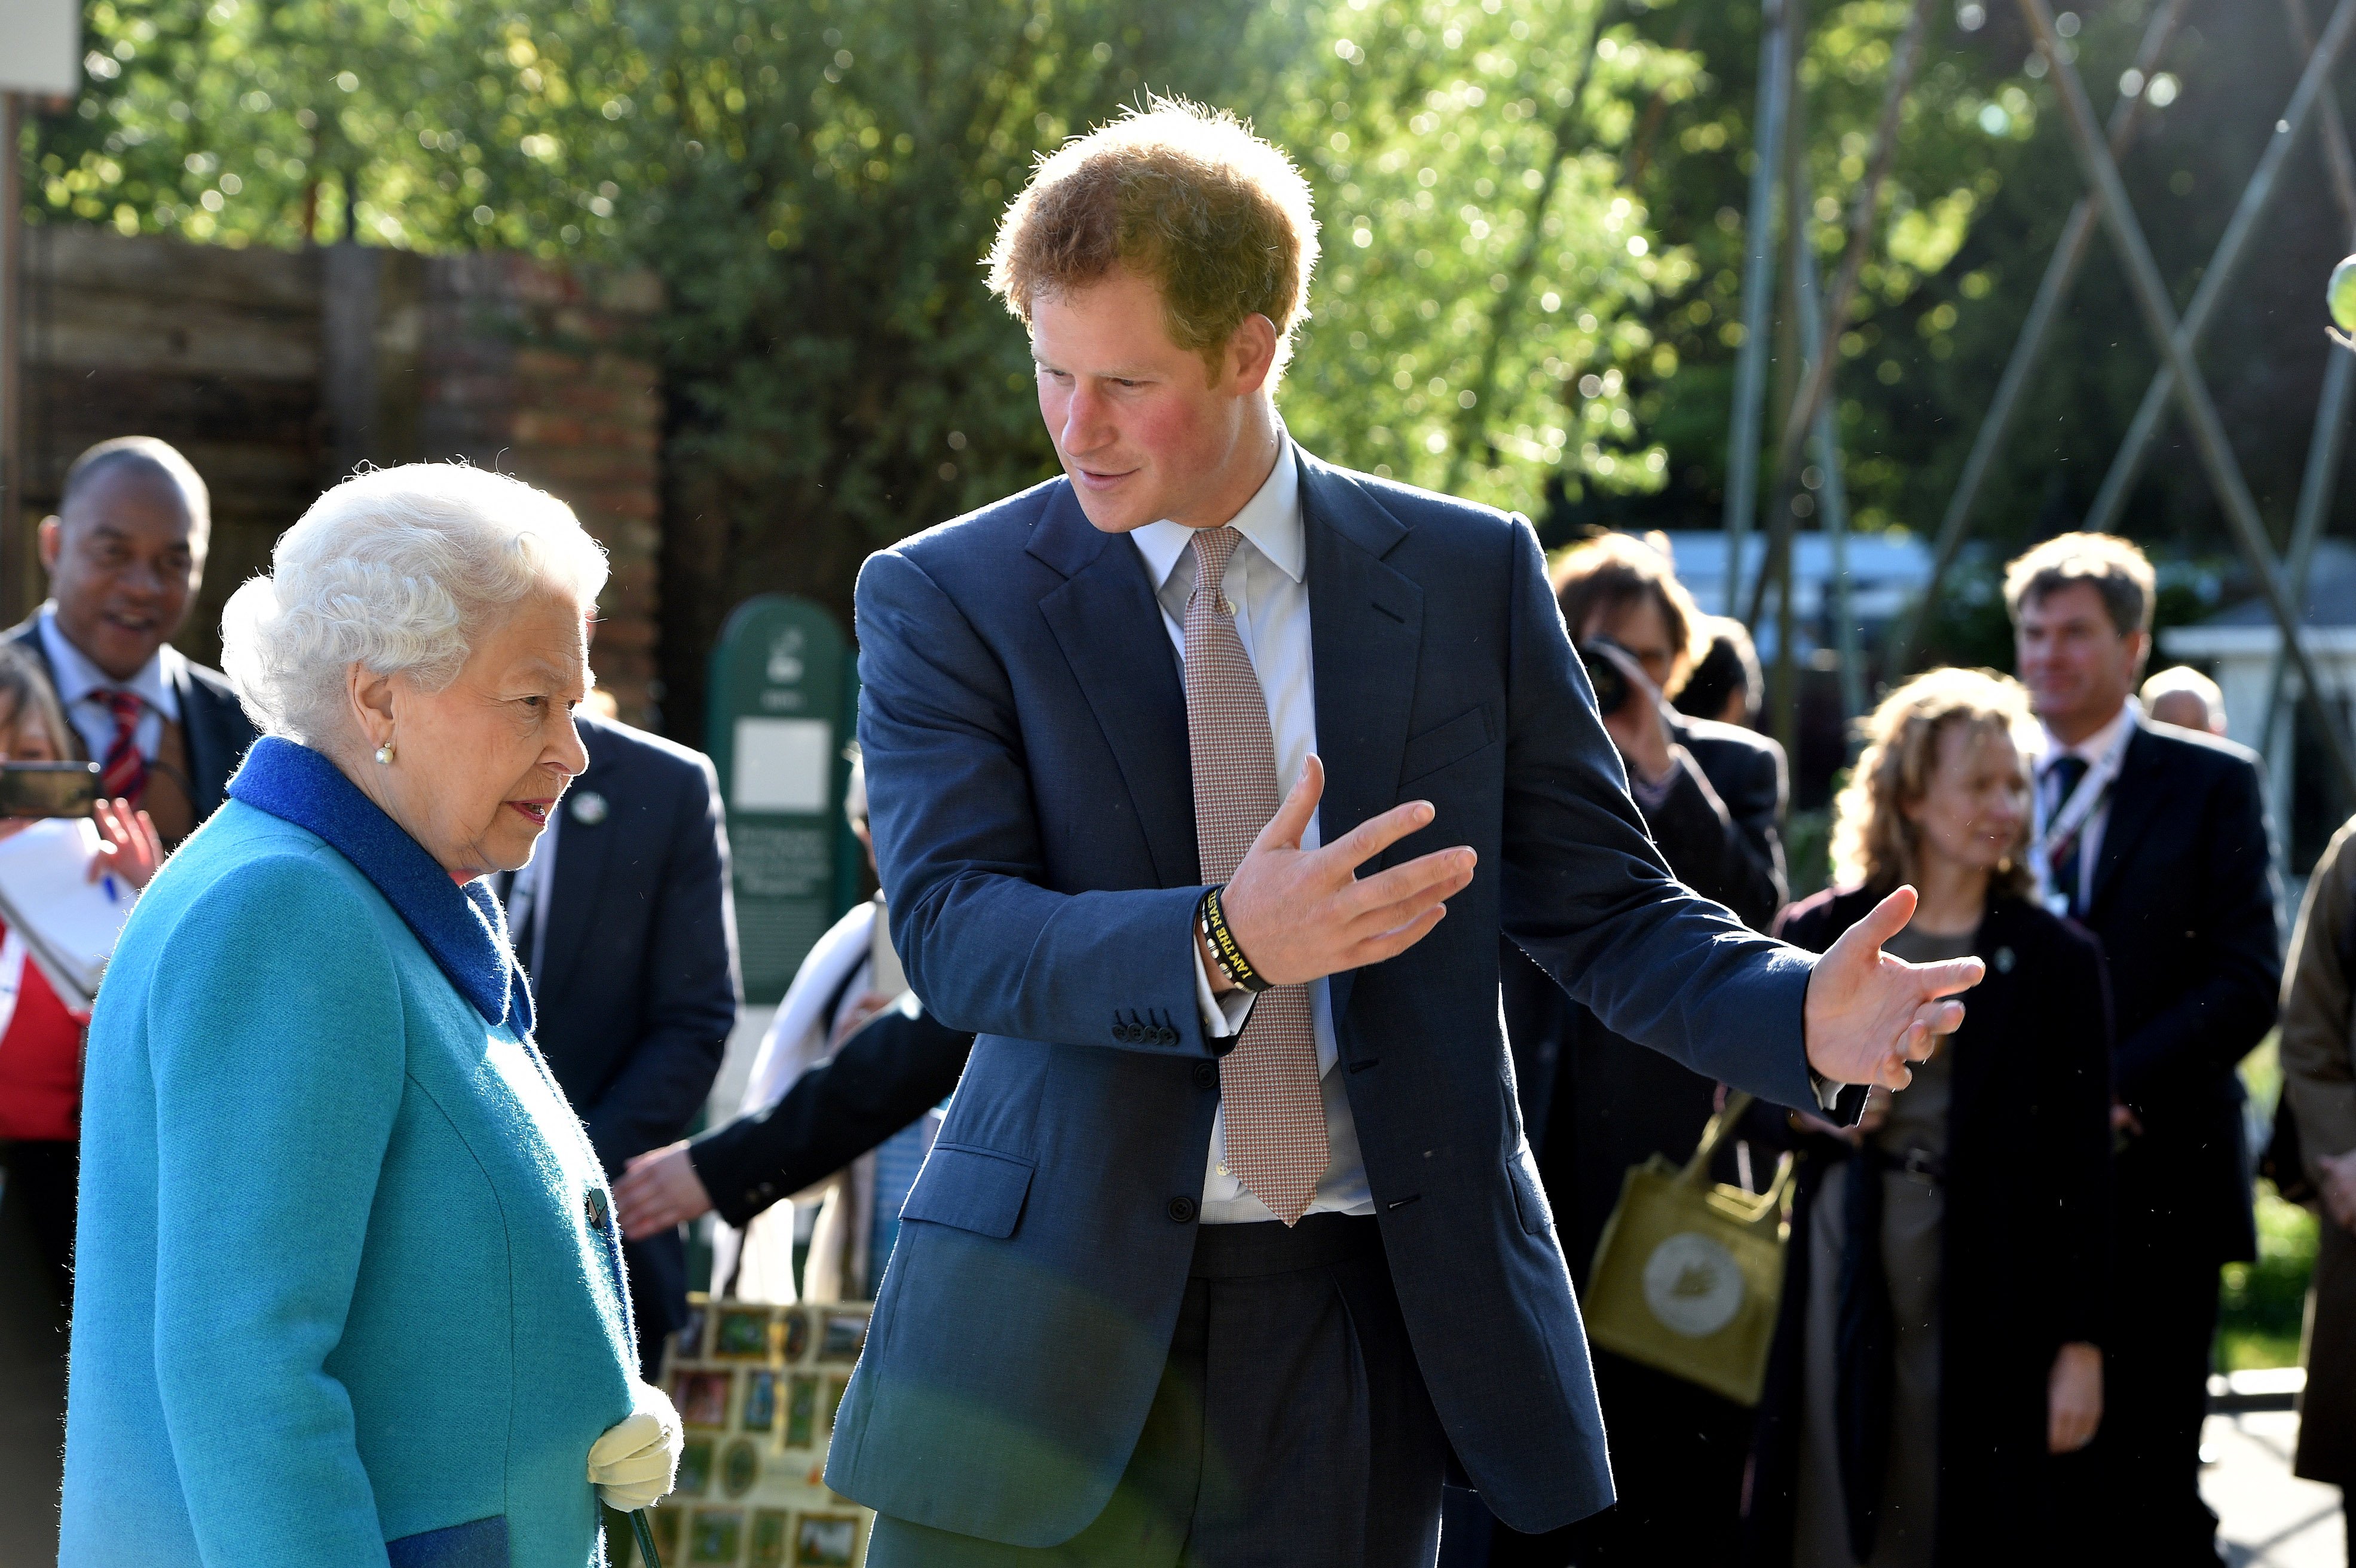 Queen Elizabeth II and Prince Harry attend at the annual Chelsea Flower show at Royal Hospital Chelsea on May 18, 2015 in London, England | Source: Getty Images